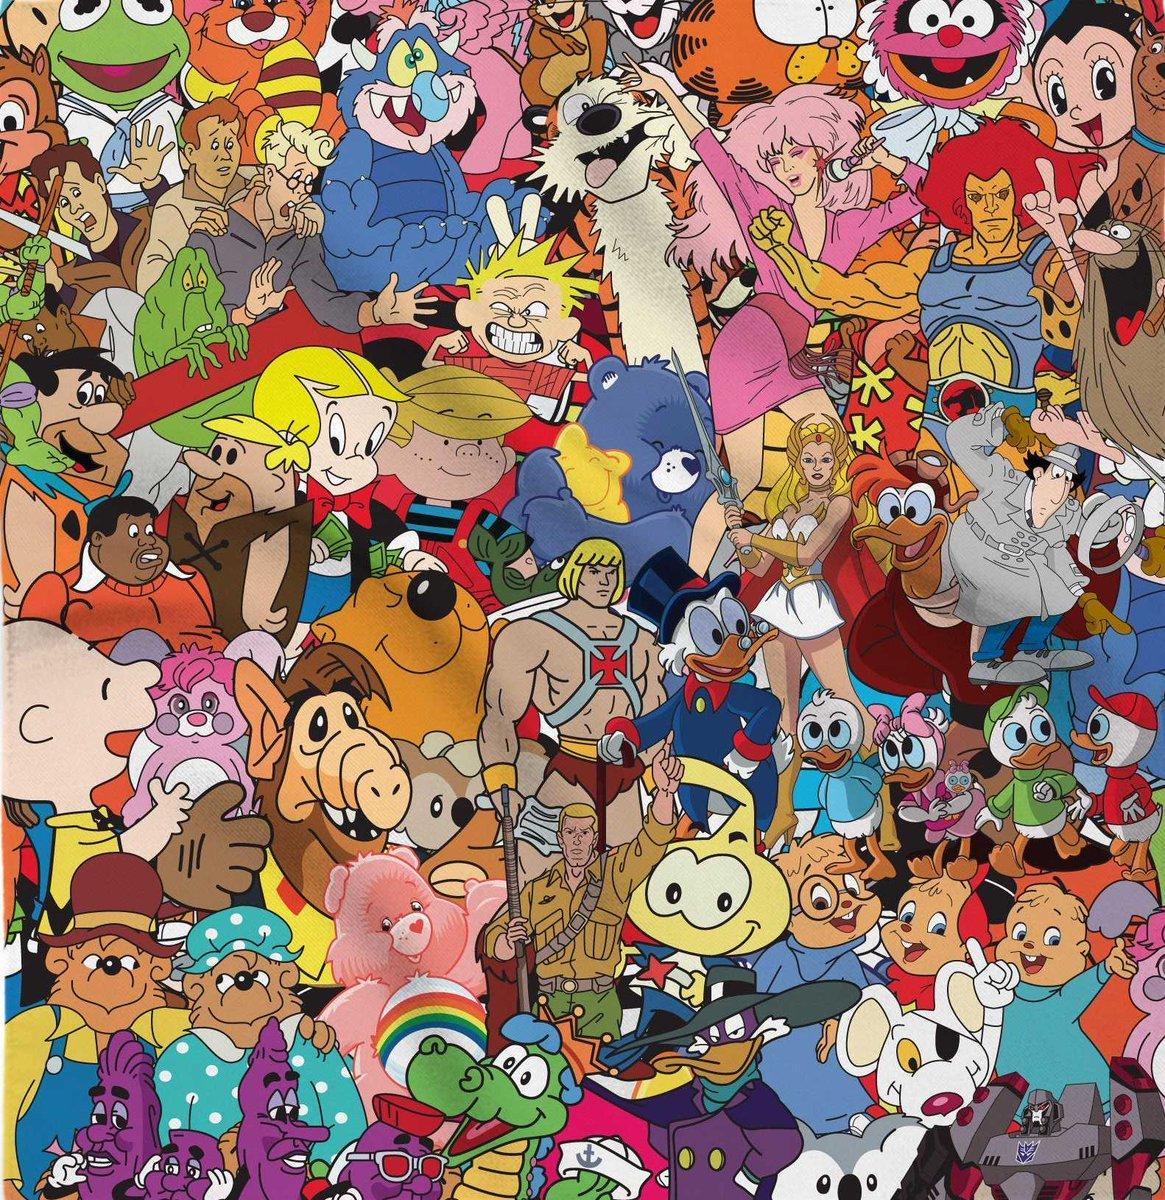 The Best Old Classic Cartoons - How Could We Forget These Shows?